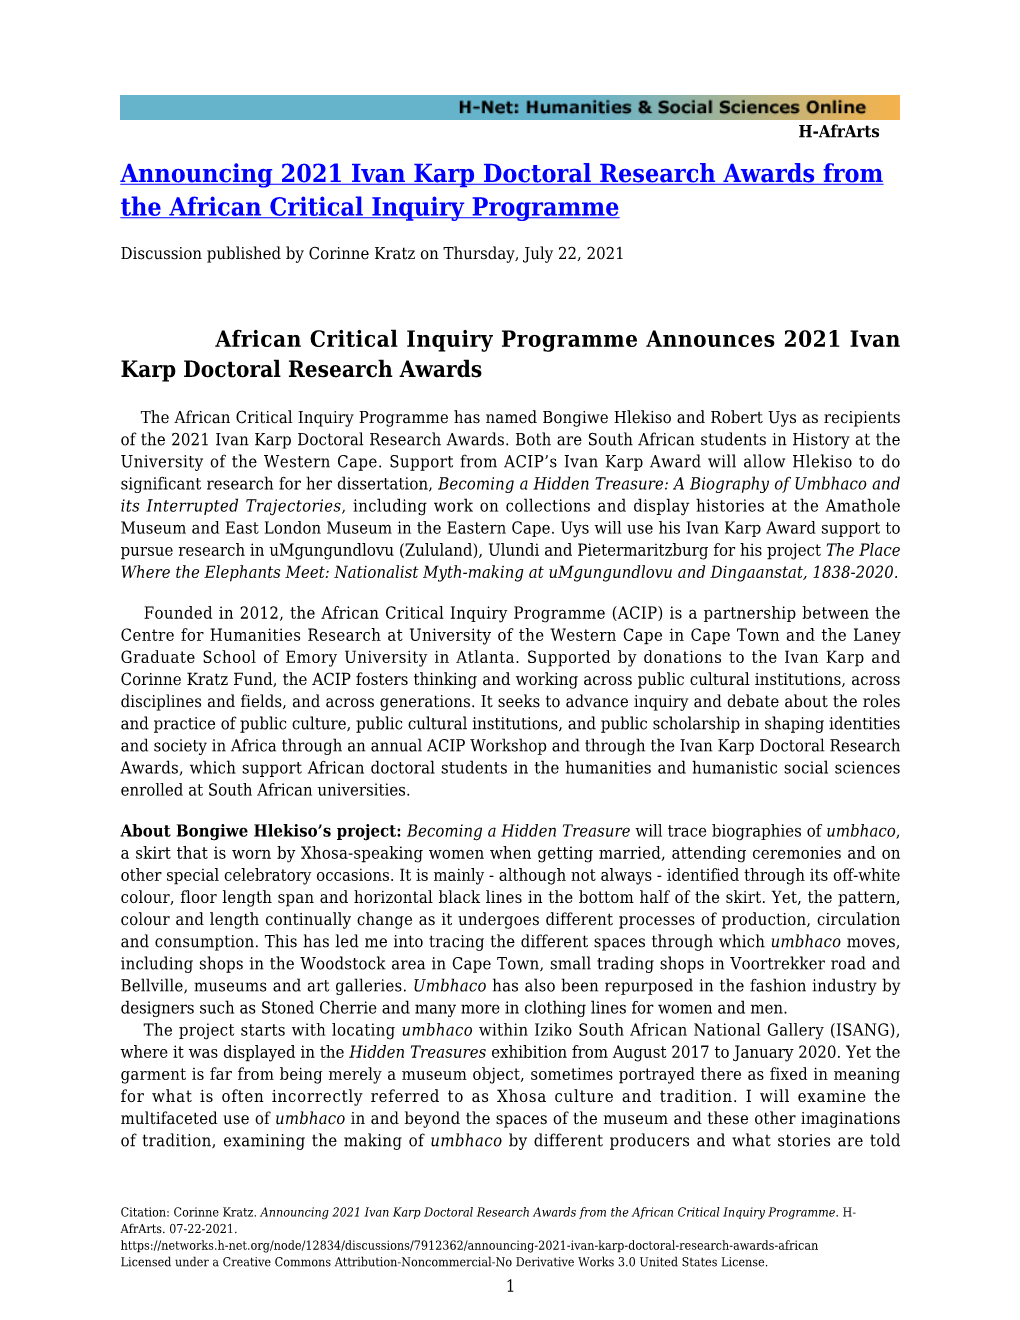 Announcing 2021 Ivan Karp Doctoral Research Awards from the African Critical Inquiry Programme